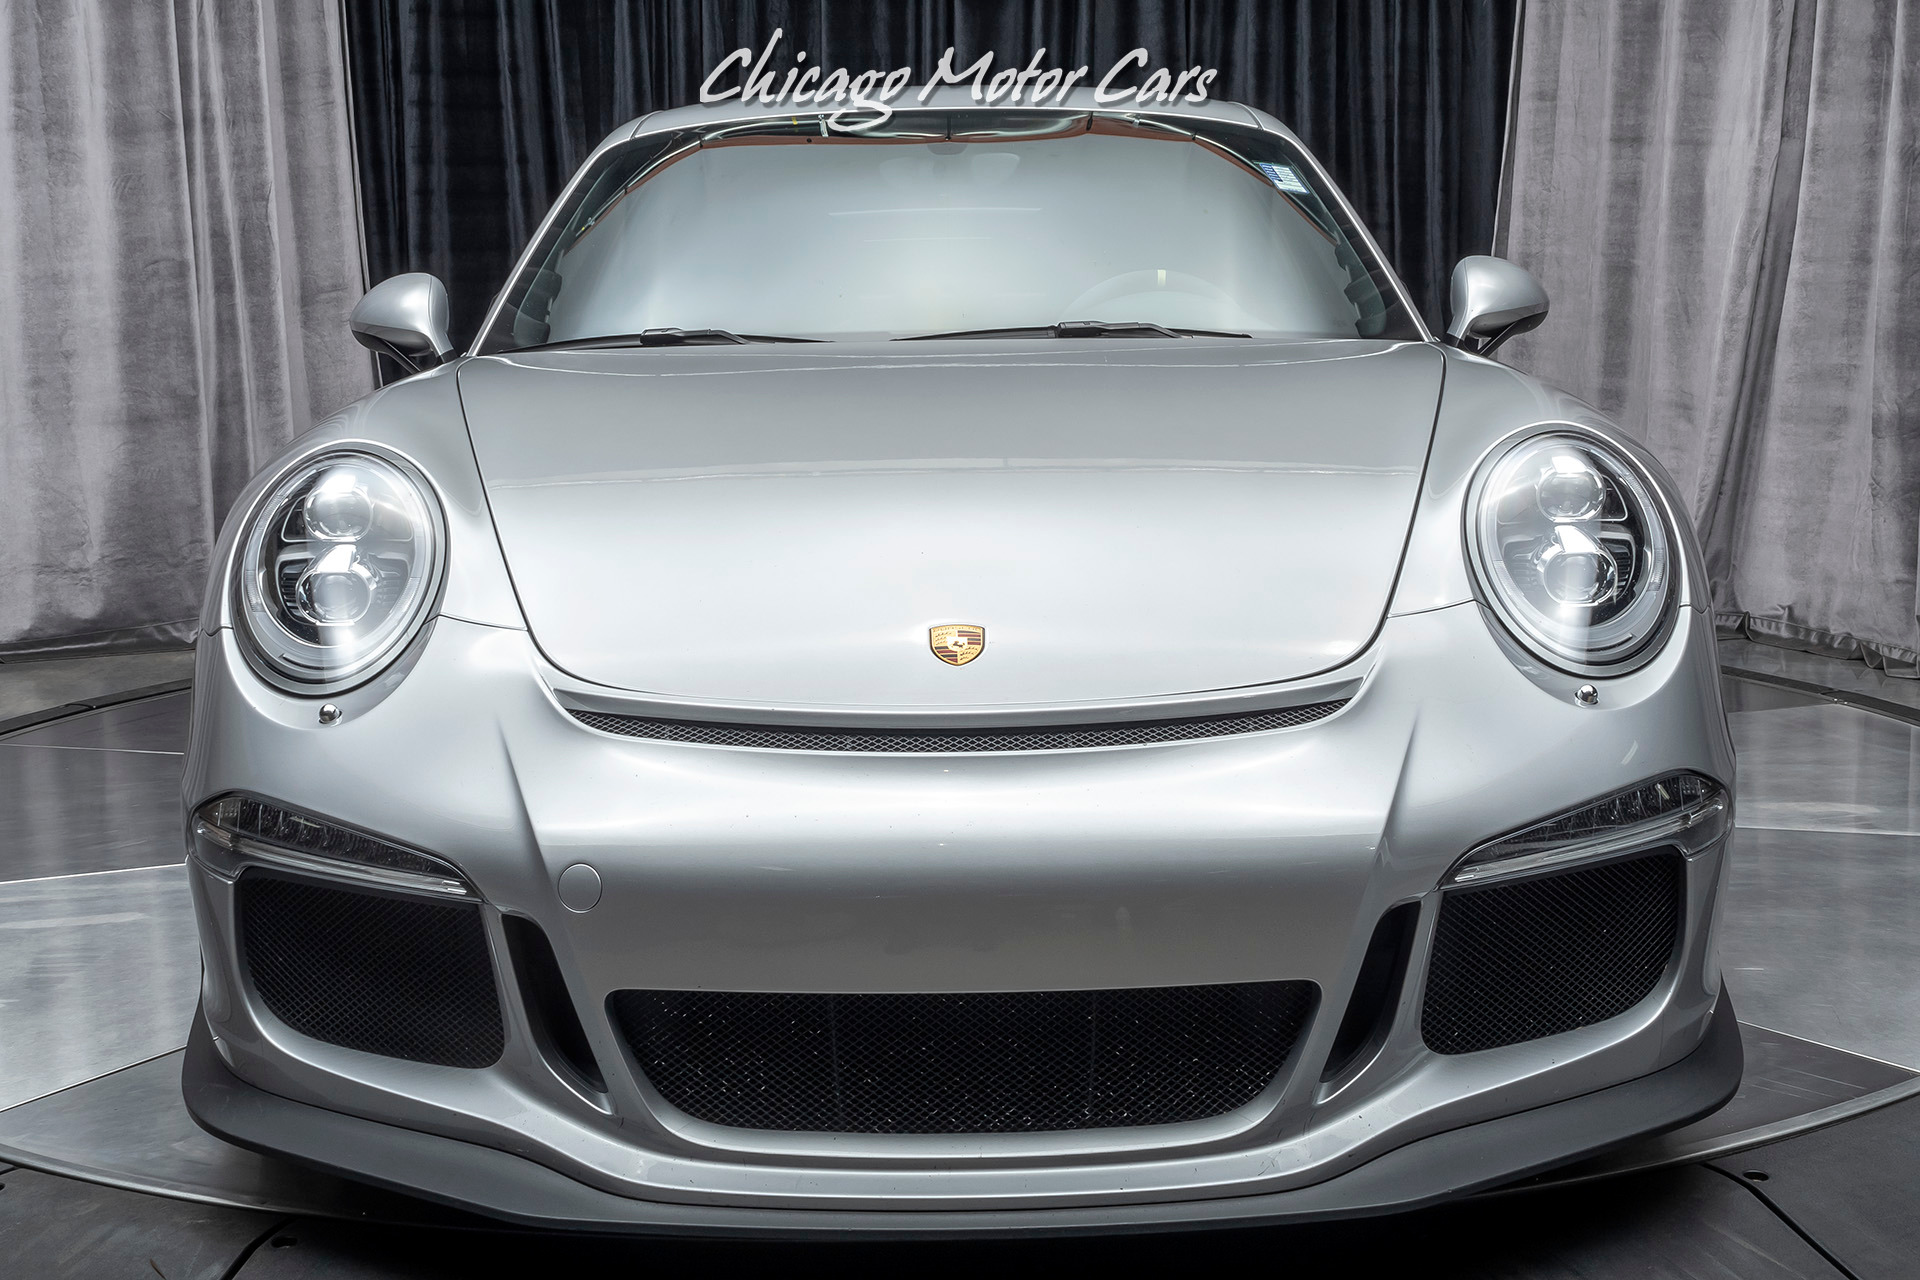 Used-2015-Porsche-911-GT3-Coupe-MSRP-158k-Ceramic-Brakes-Axle-Lift-Carbon-Buckets-GMG-Upgrades-CPO